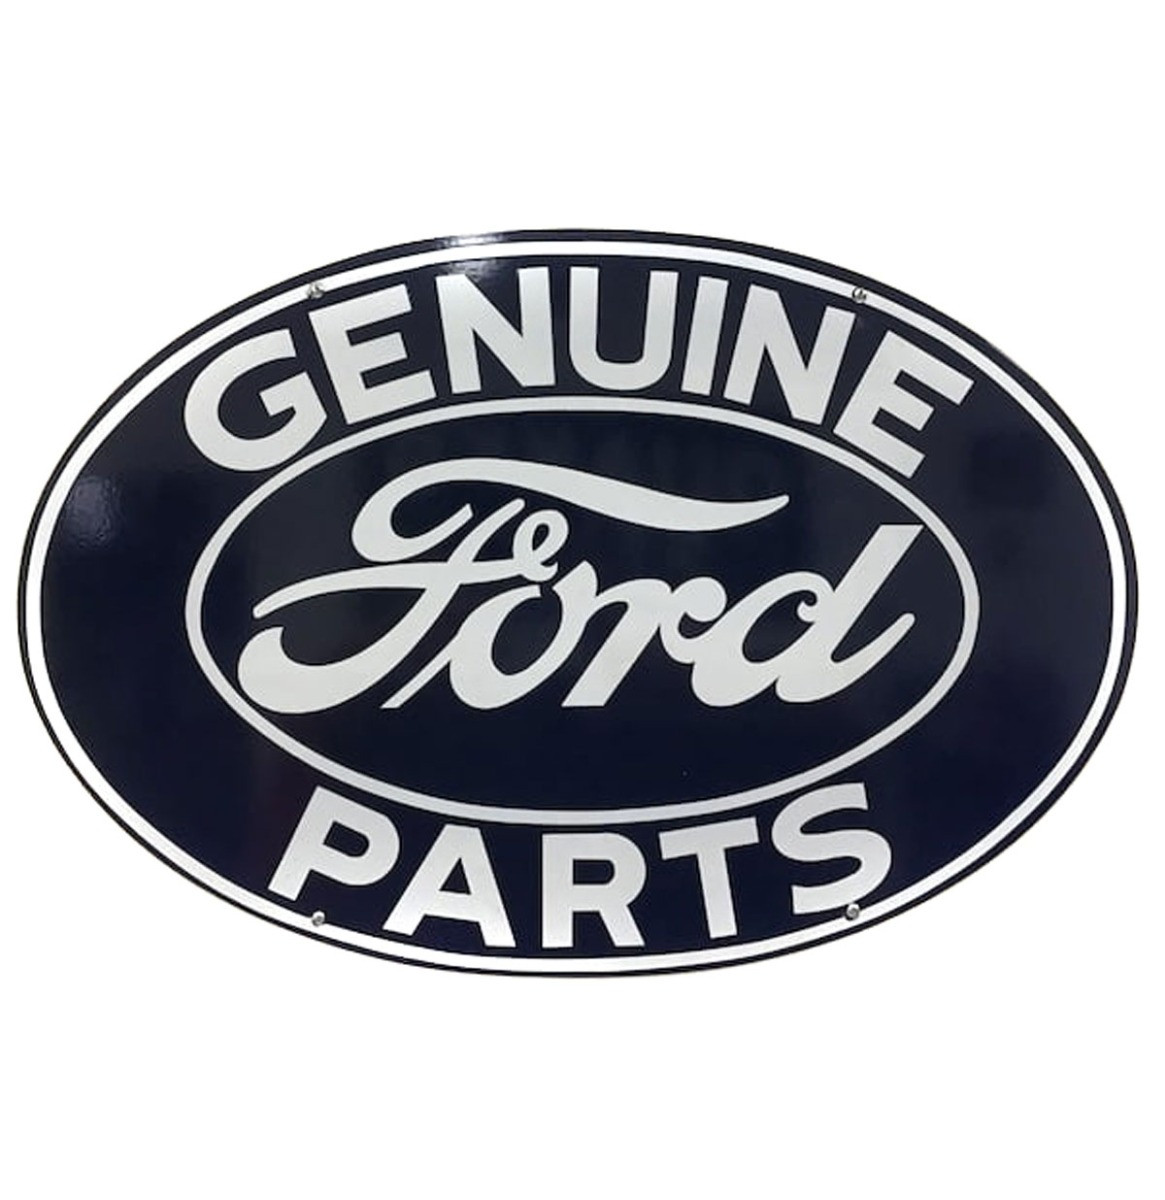 Genuine Ford Parts Emaille Bord - 42 x 28 cm